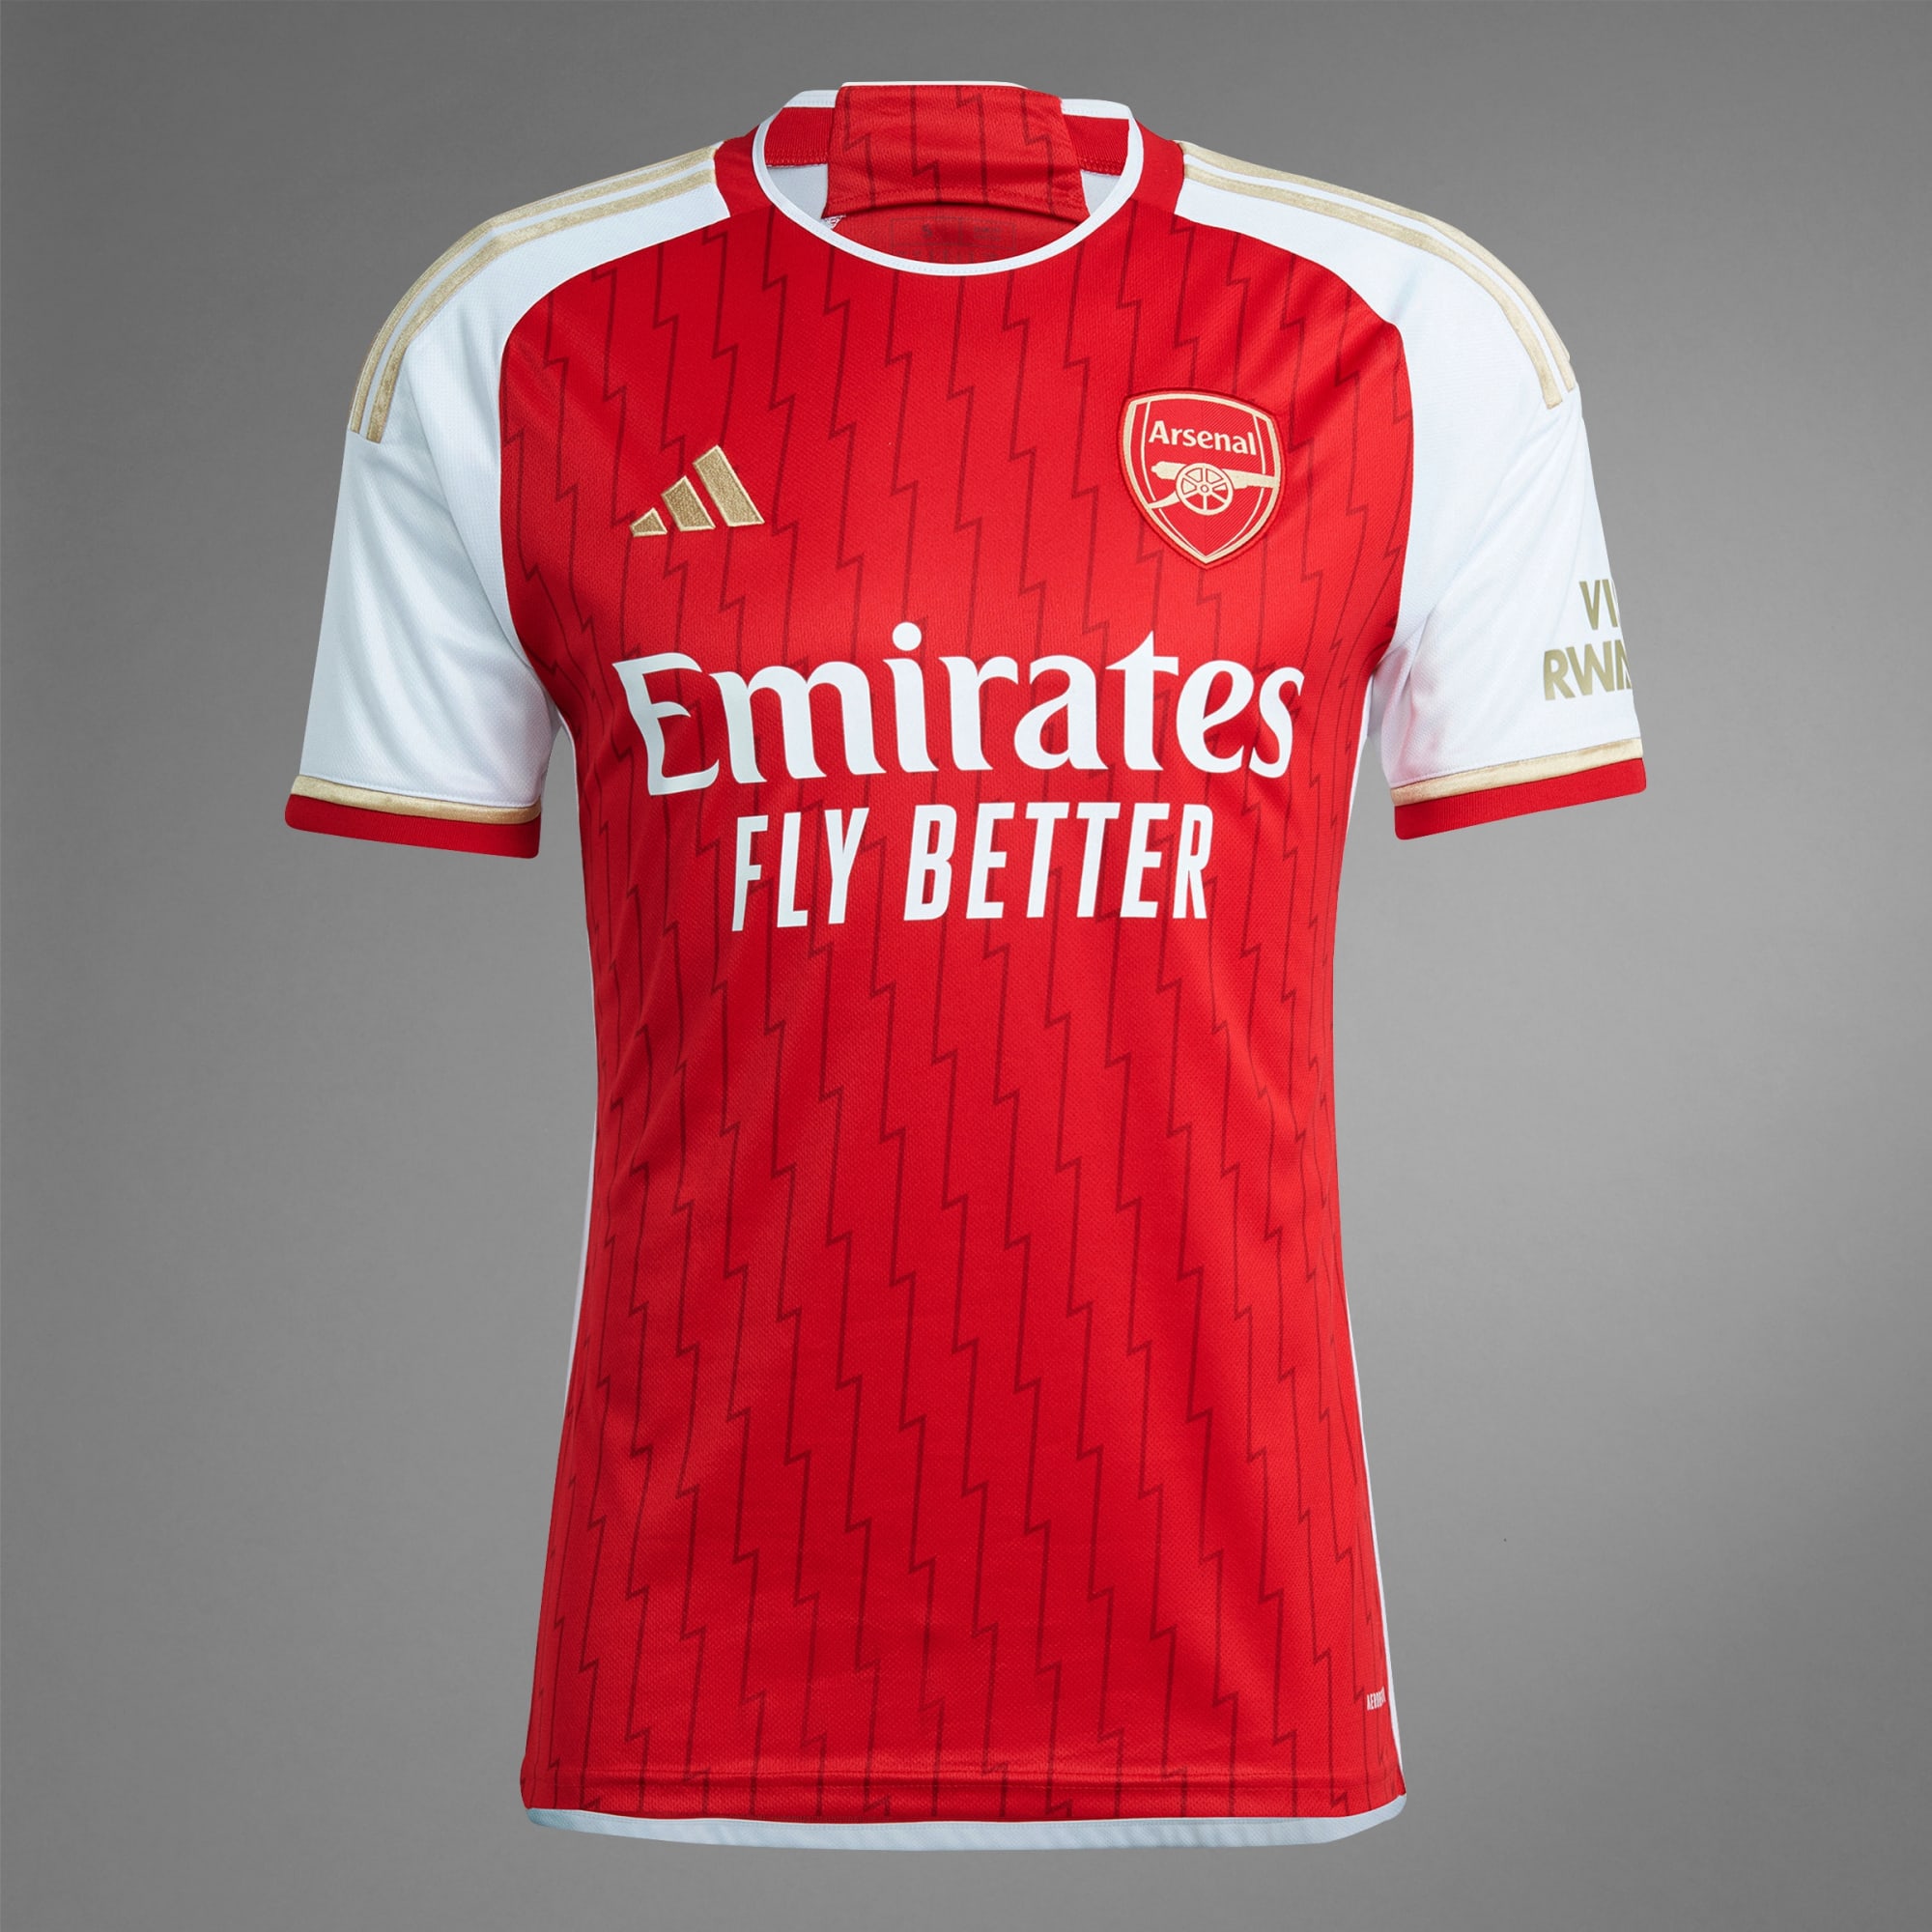 Personalised Arsenal Football Jerseys - Your Jersey